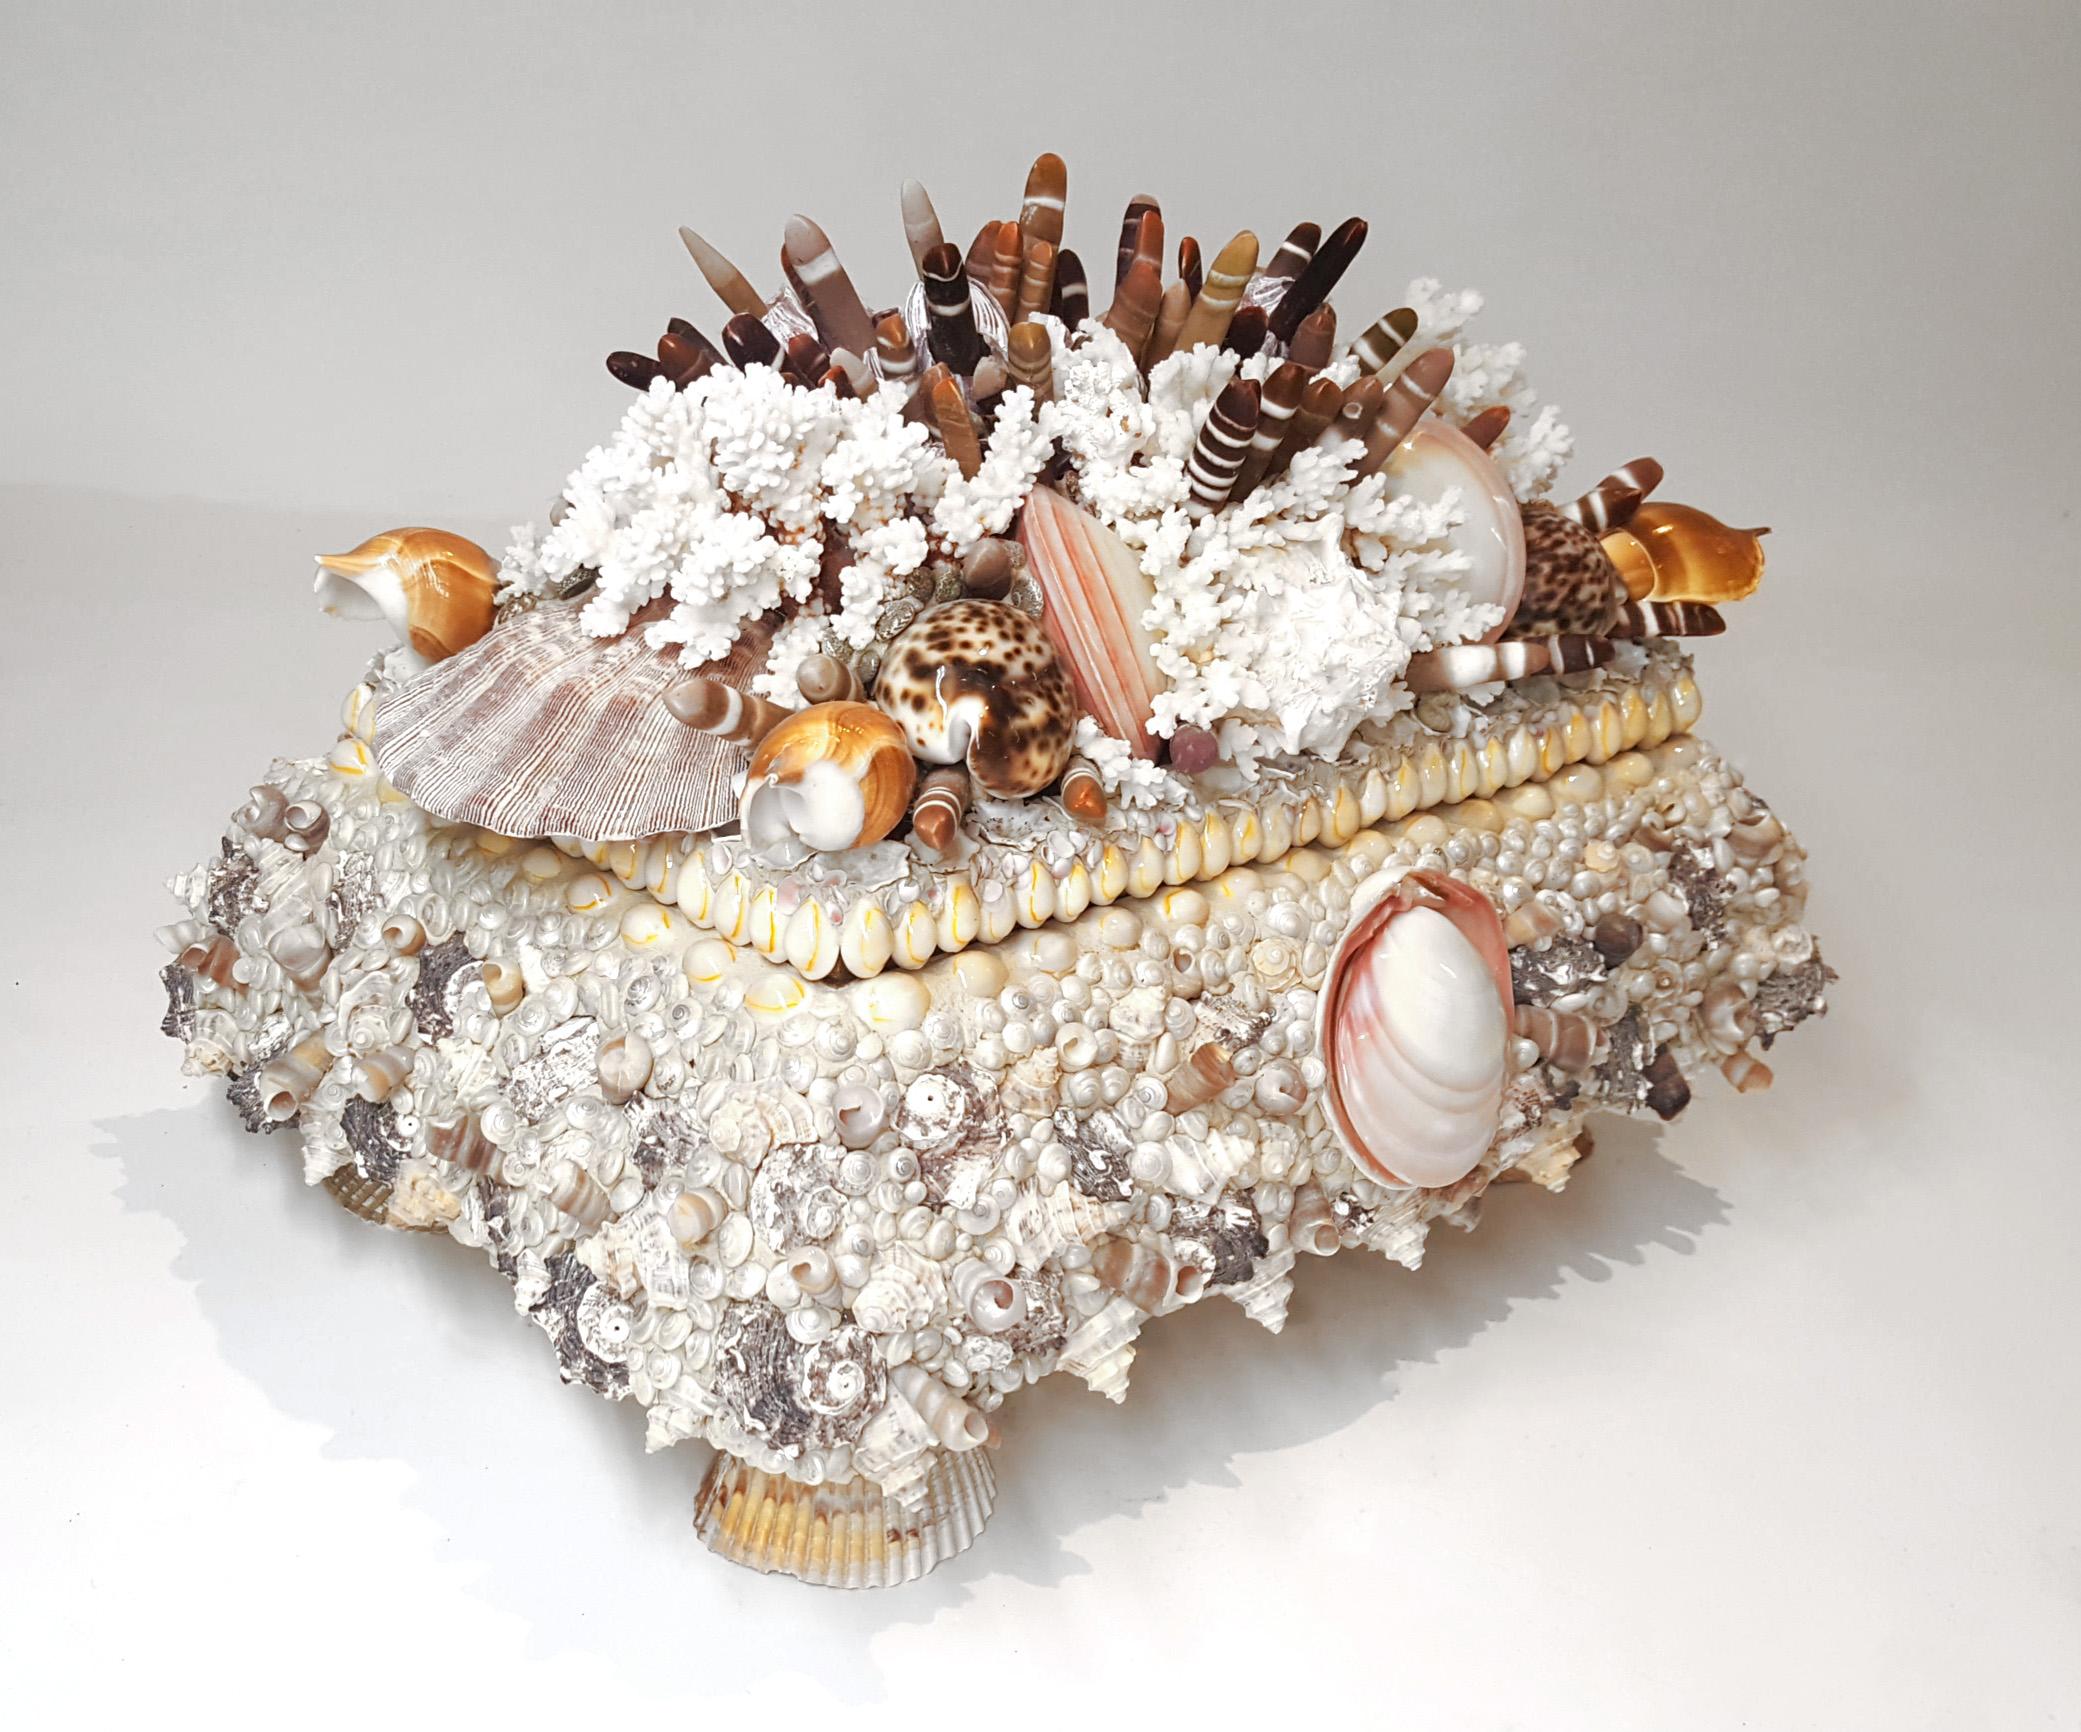 This one of a kind Jewelry Box was handmade by a local Texas artisan for their private collection. No expense was spared in the acquisition of exotic shells and mother of pearl when creating this piece. Each and every shell was attached to the box